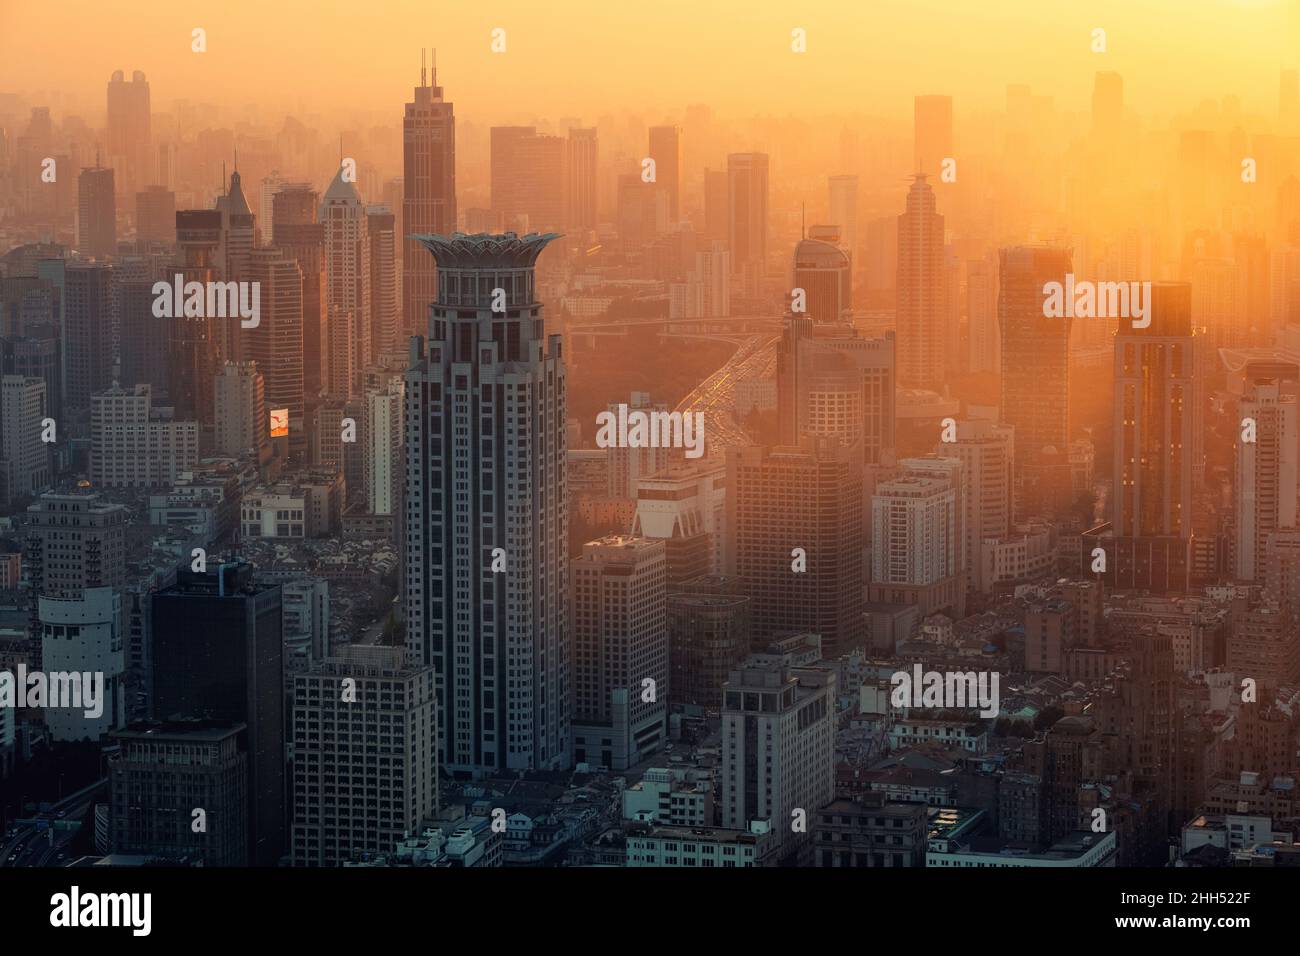 The skyline of urban architectural landscape in the Bund at sunset, Shanghai, China Stock Photo